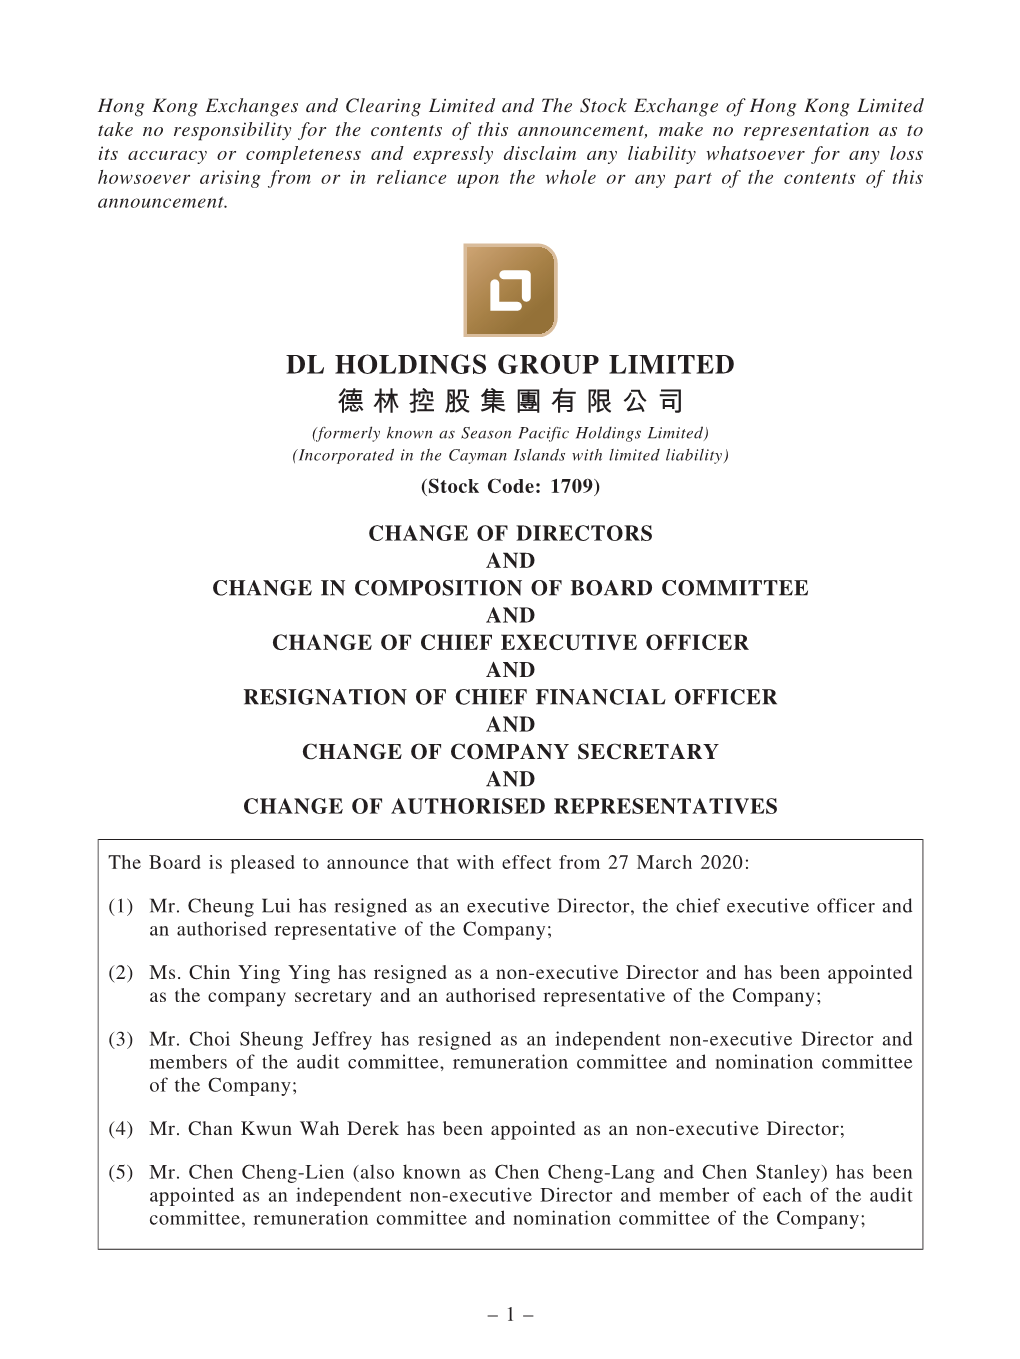 Change of Directors and Change in Composition of Board Committee and Change of Chief Executive Officer